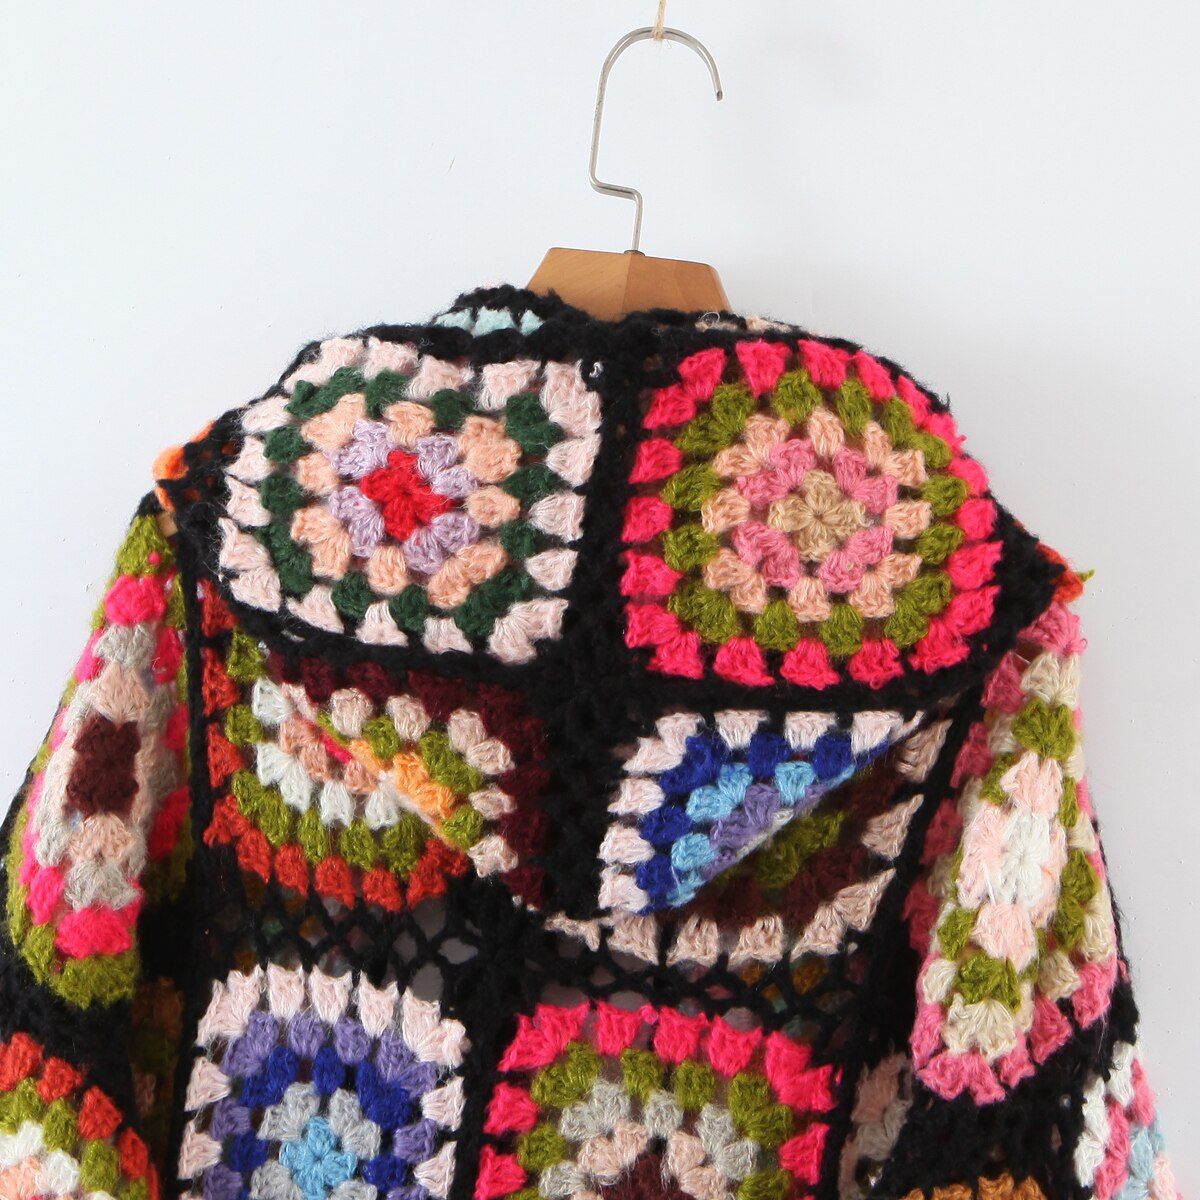 Bohemia Colored Plaid Flower Granny Square Hand Crochet Hooded Sweater Long Cardigan_ jehouze 